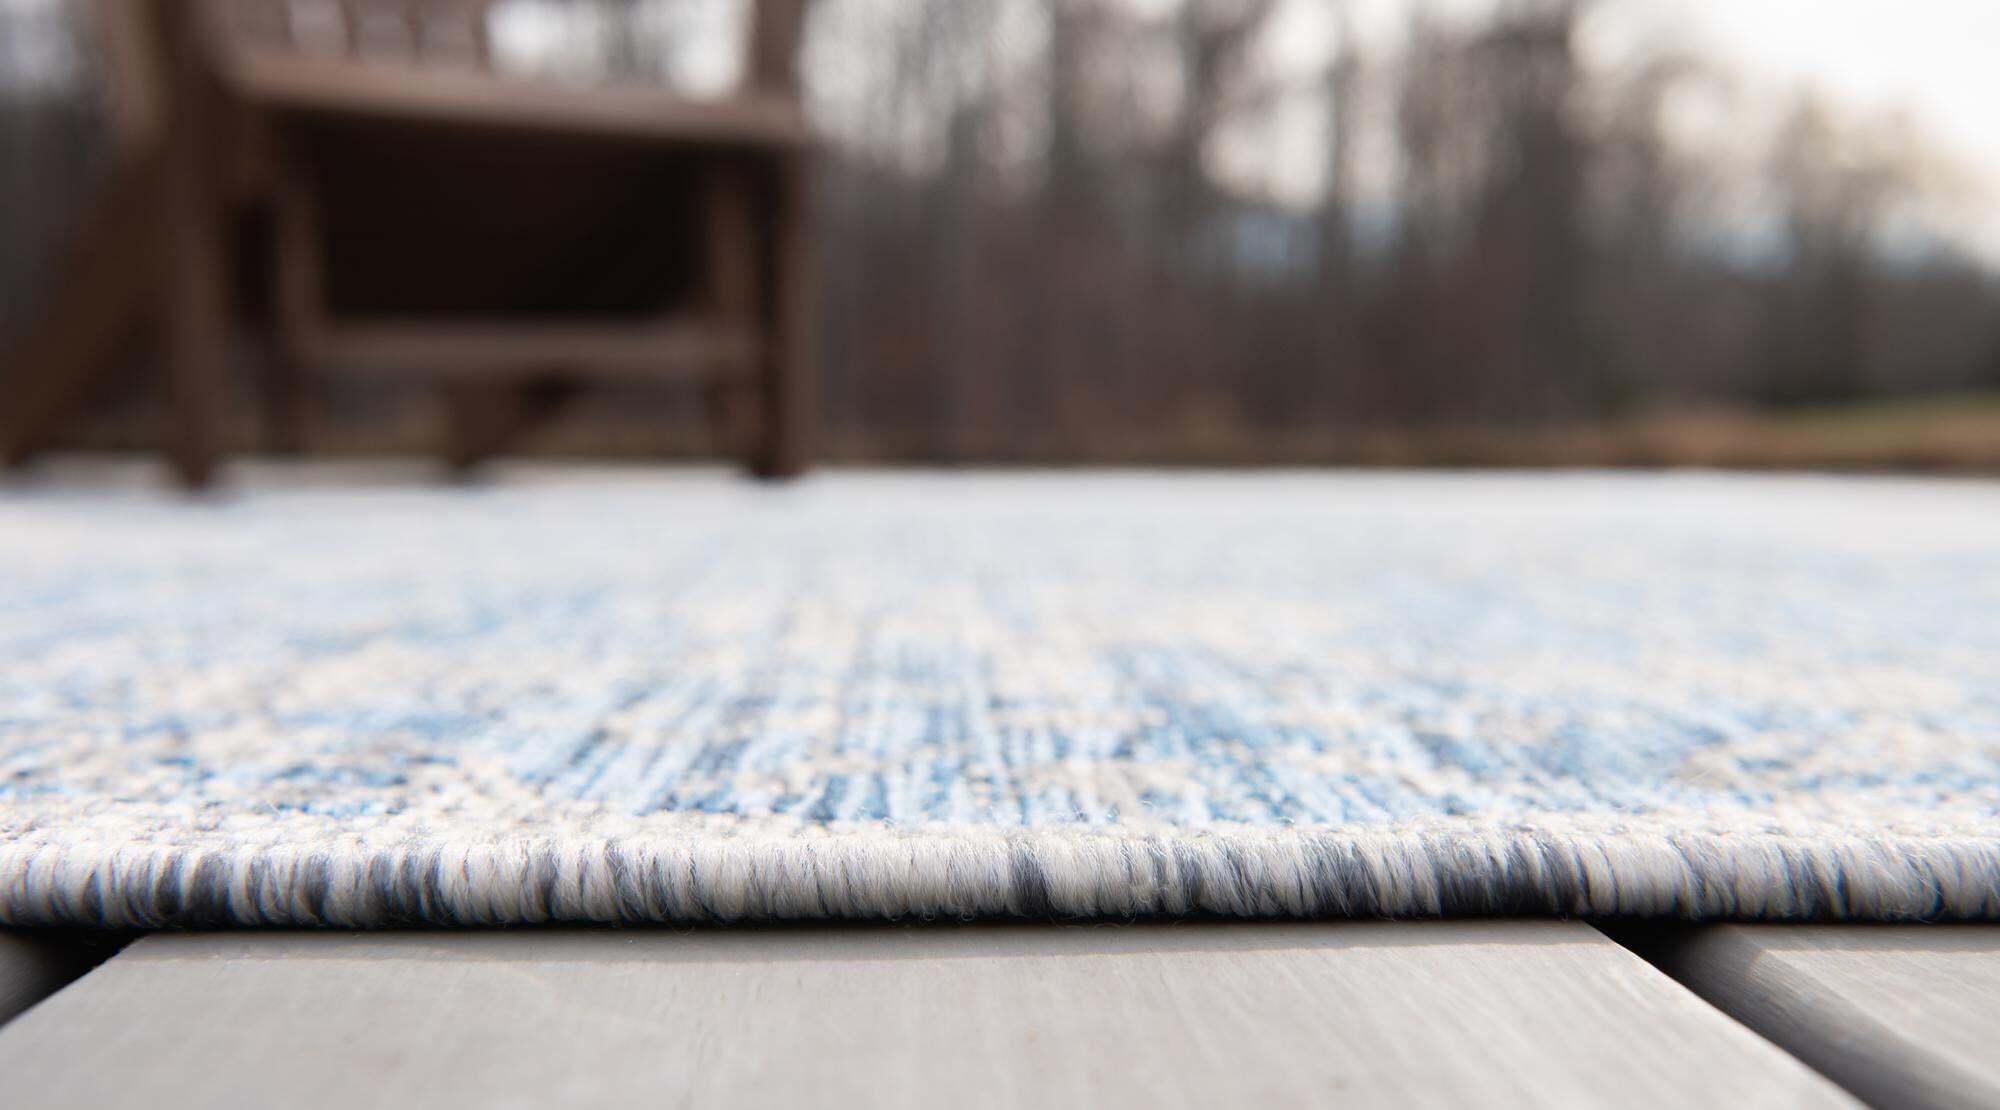 Unique Loom Outdoor Rugs - Outdoor Traditional Geometric Rectangular 8x11 Rug Blue & Ivory